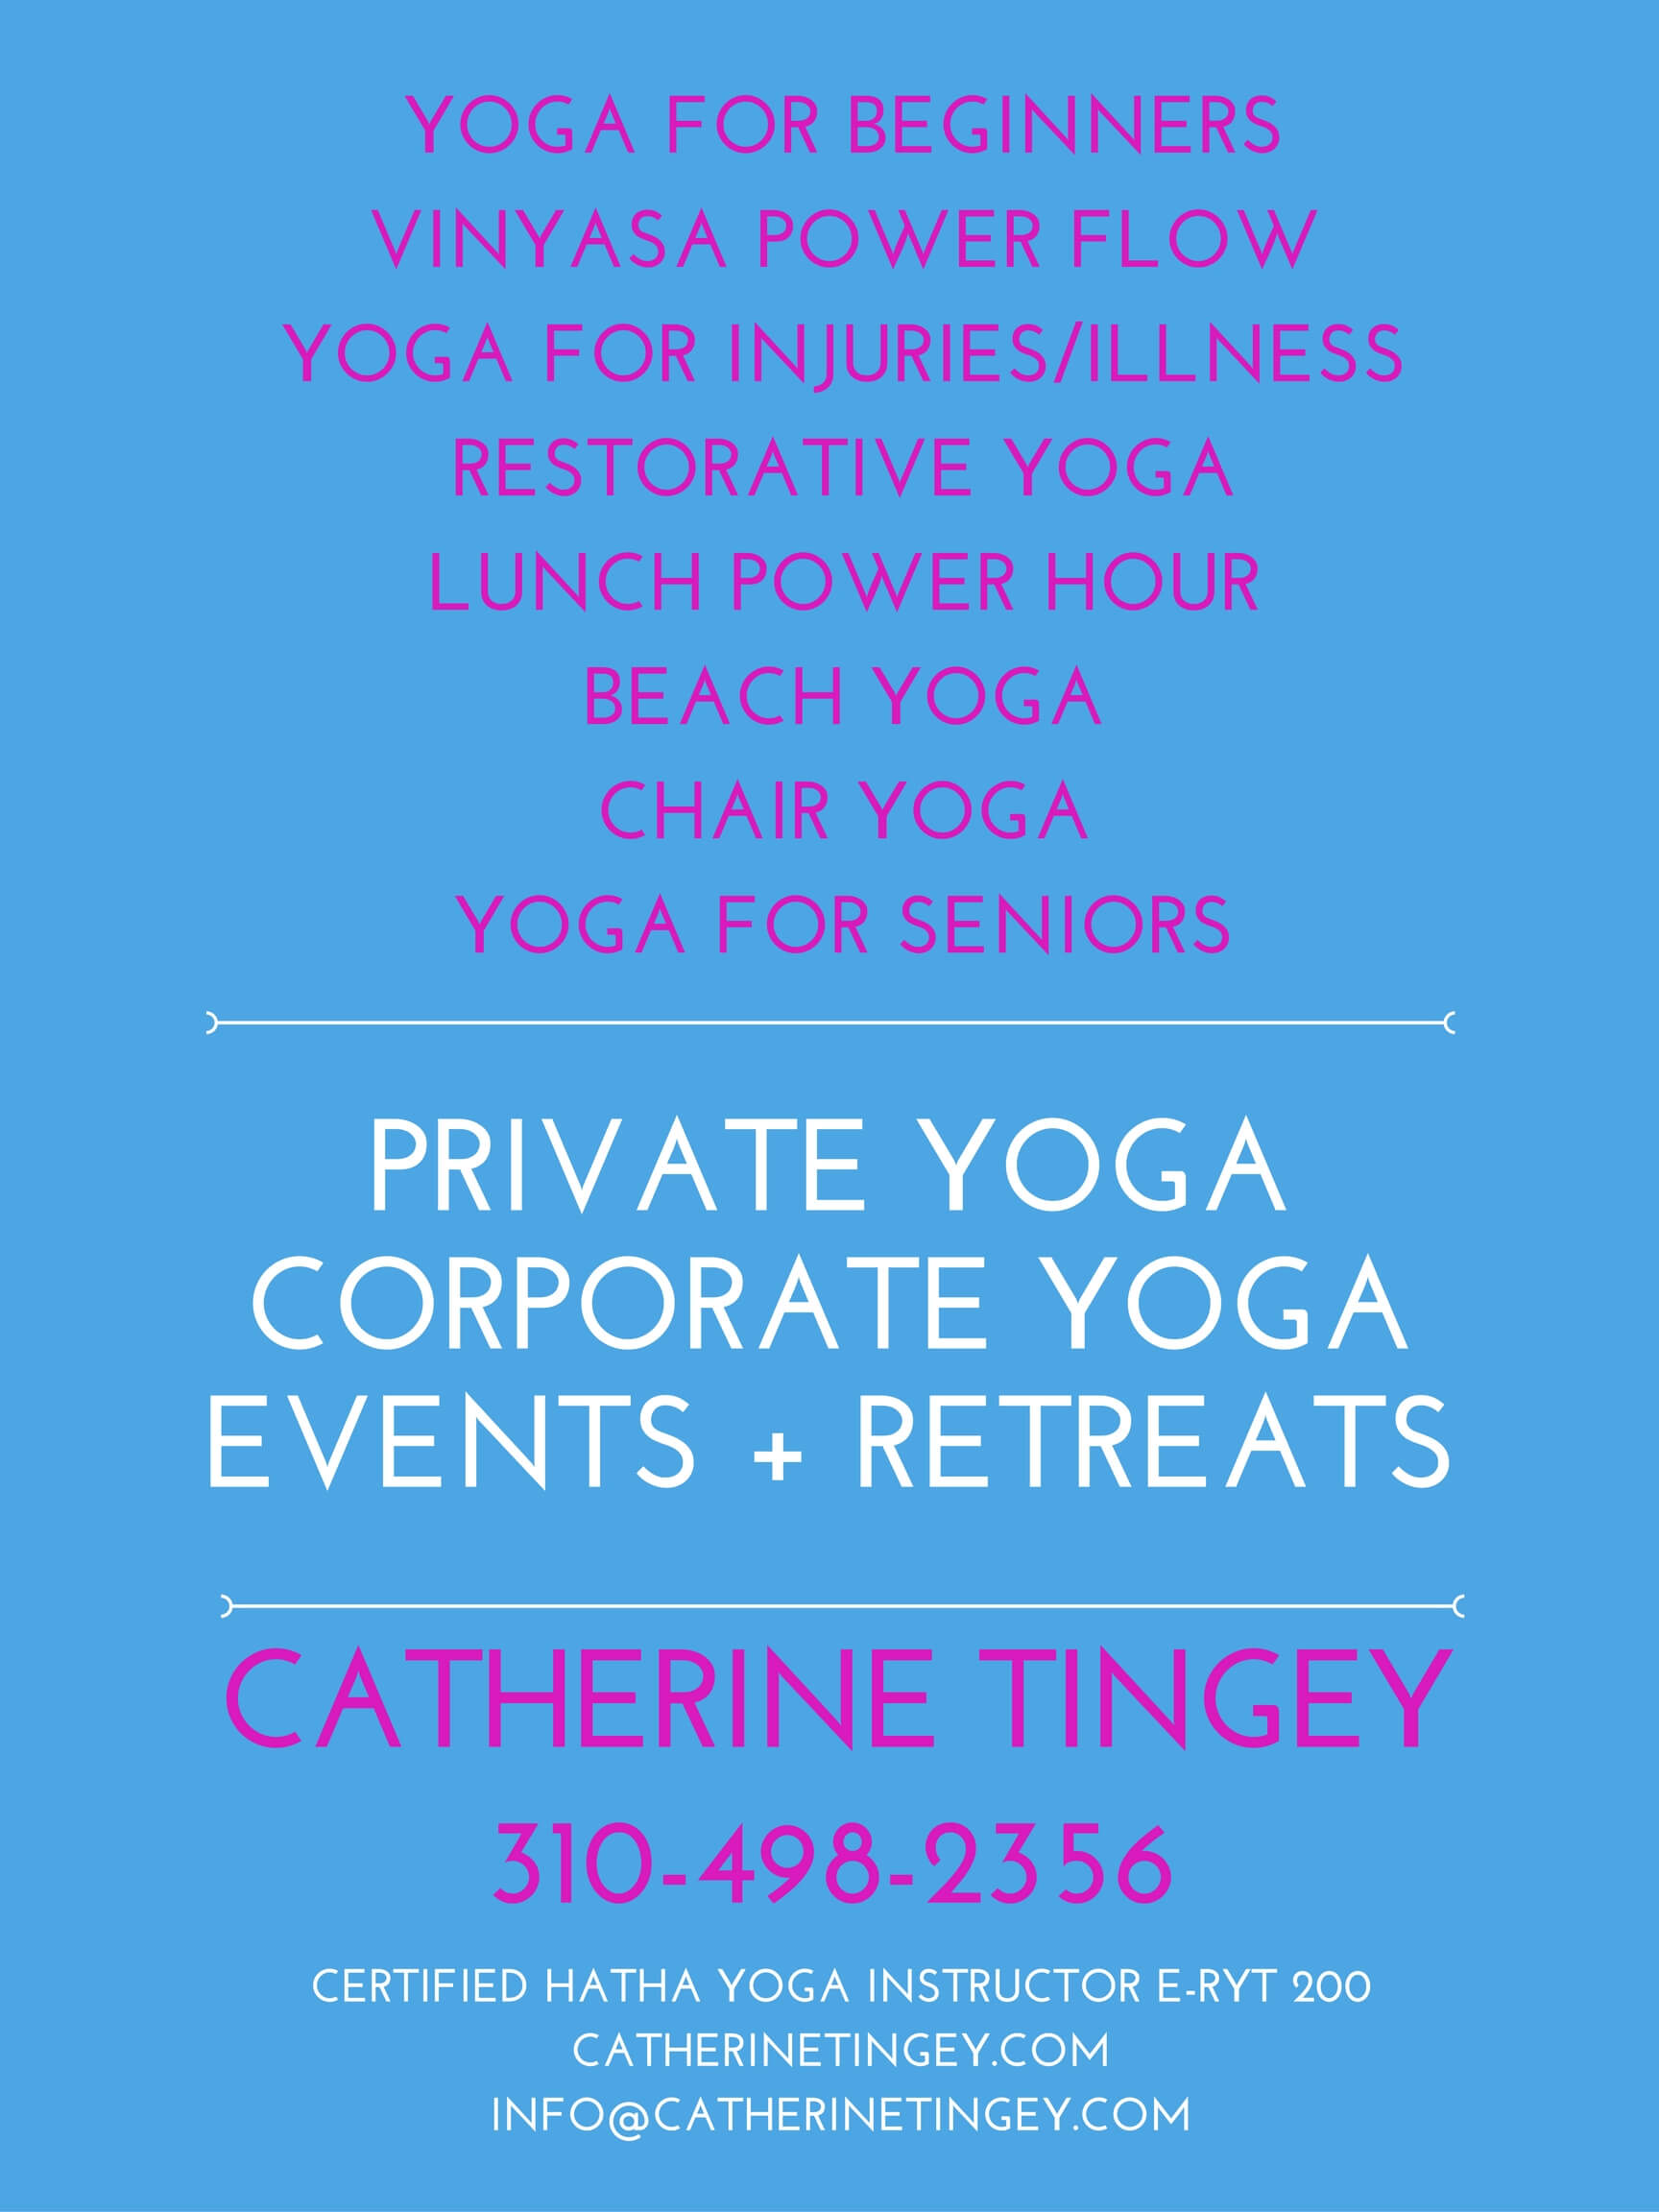 Contact Private Yoga Instructor Santa Monica Brentwood Pacific Palisades Bel Air Venice